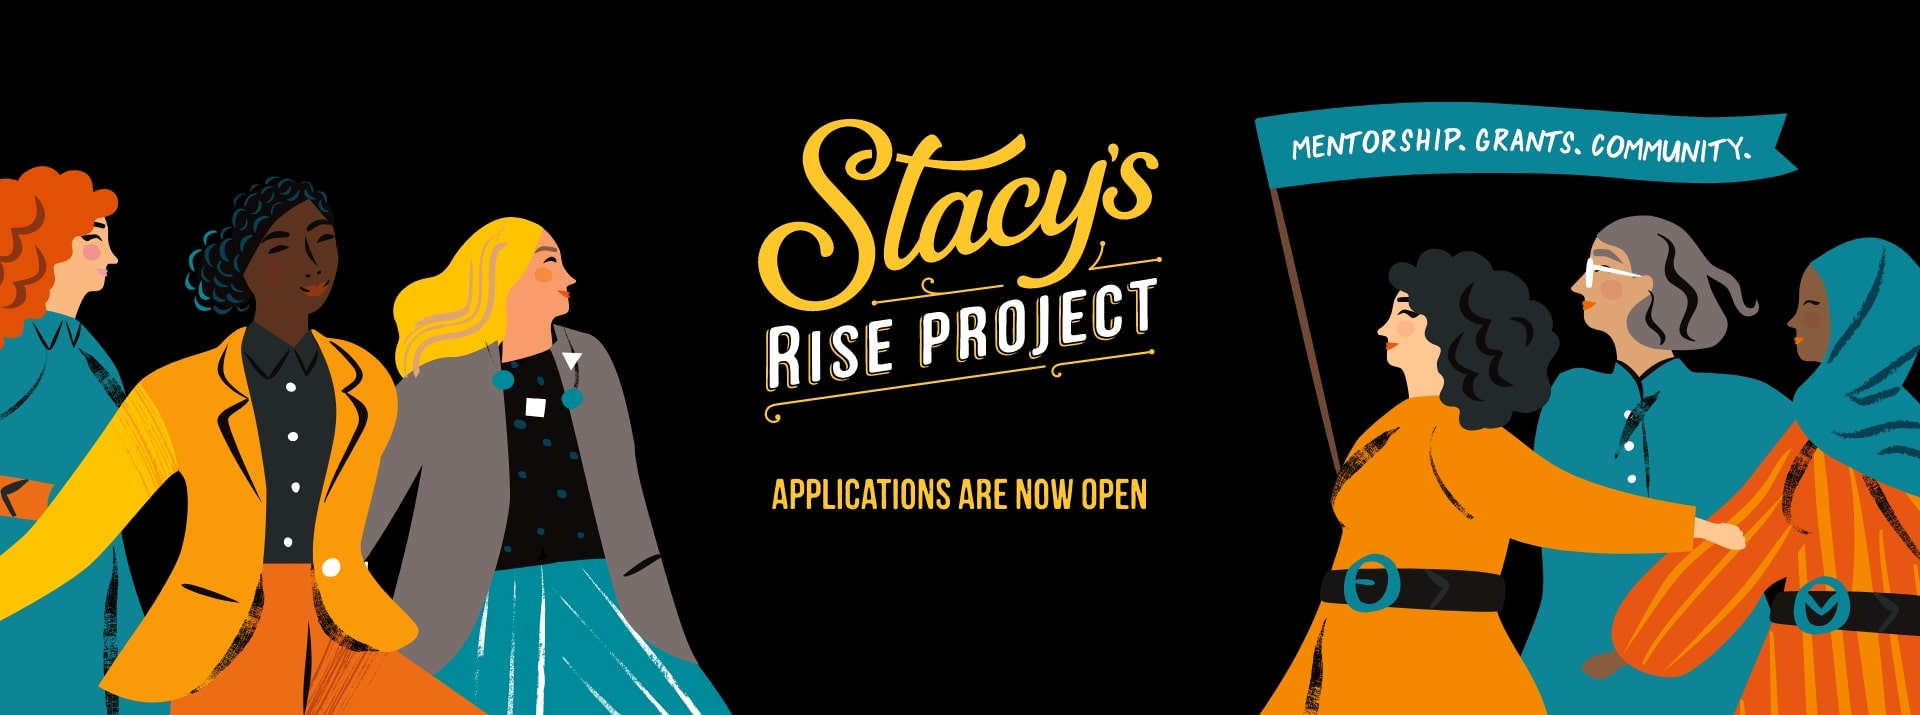 Stacy's Rise Project - Supporting women founded businesses. - Applications are now open.